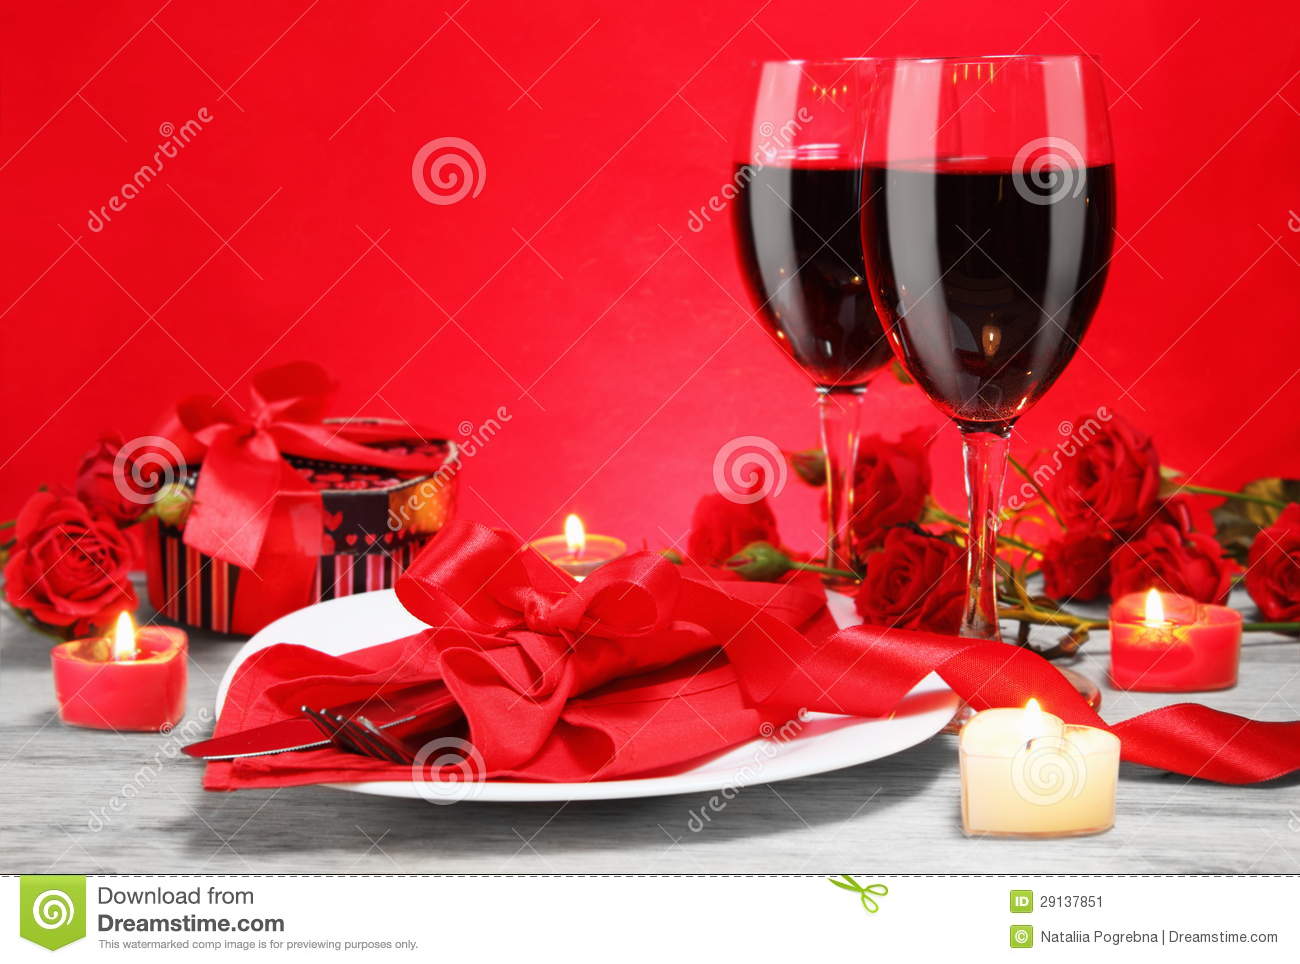 Romantic Candlelight Dinner For Two Lovers Stock Image   Image